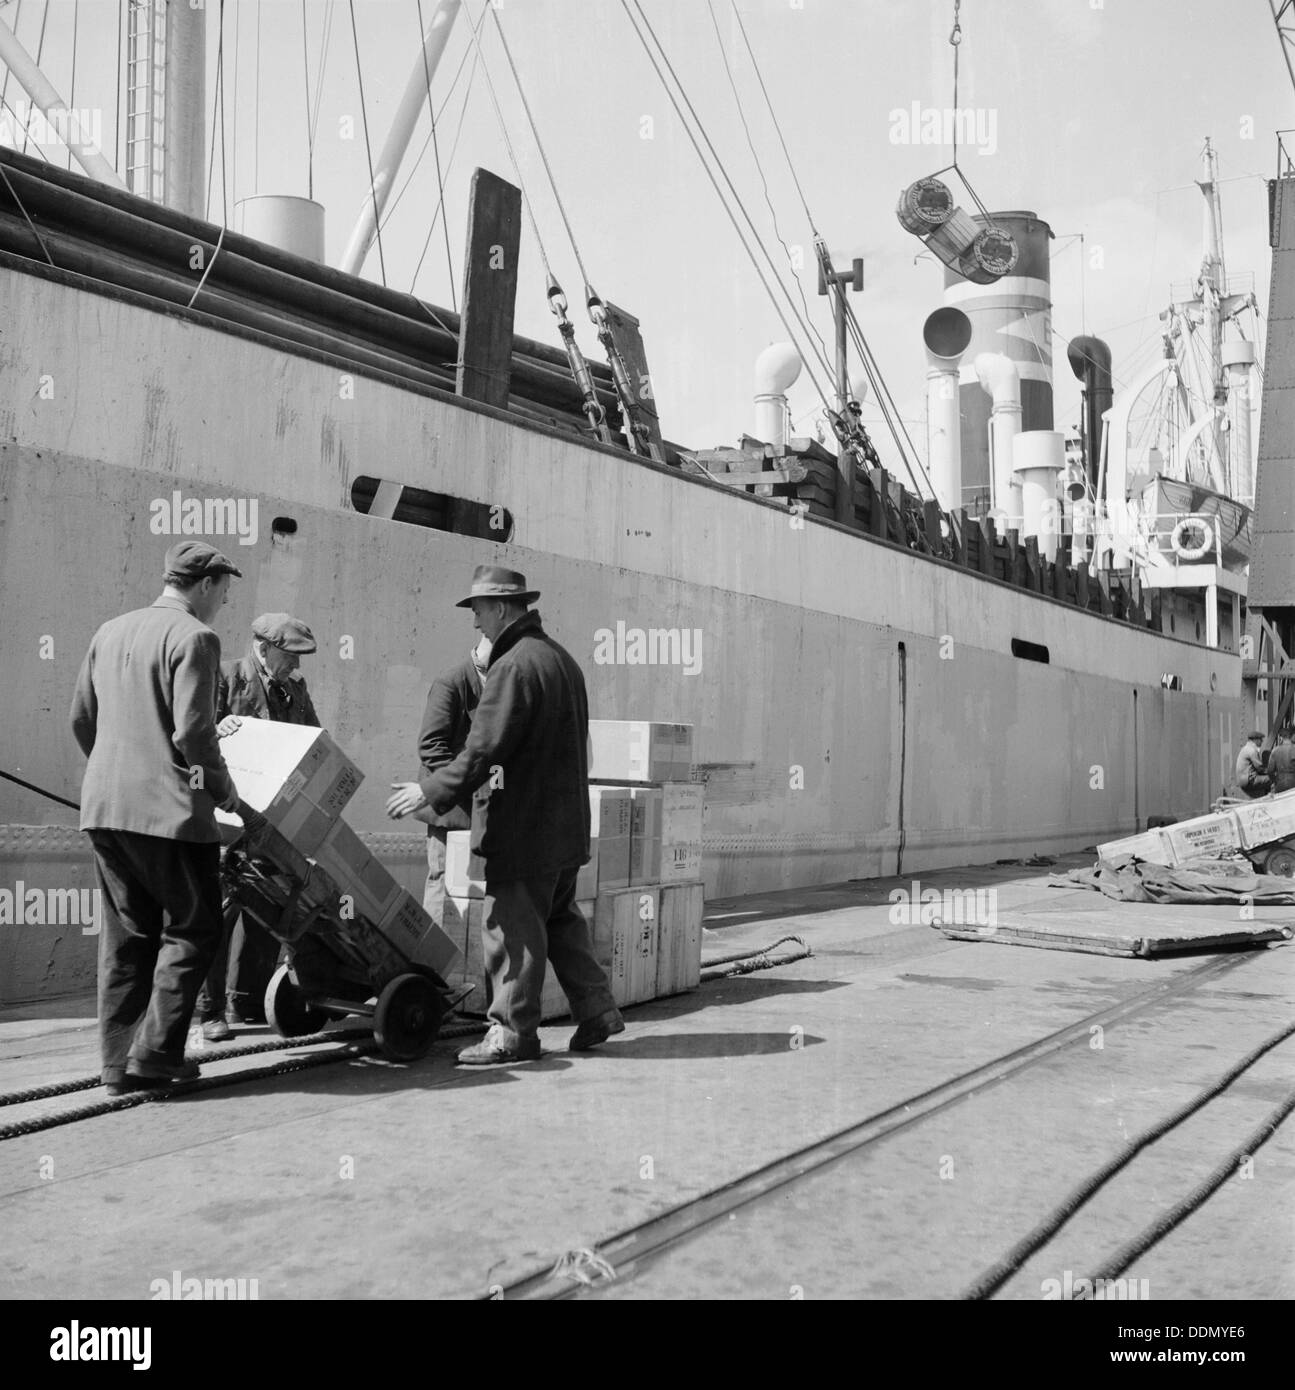 Loading a ship at the North Quay, West India Docks, London, c1945-c1965. Artist: SW Rawlings Stock Photo